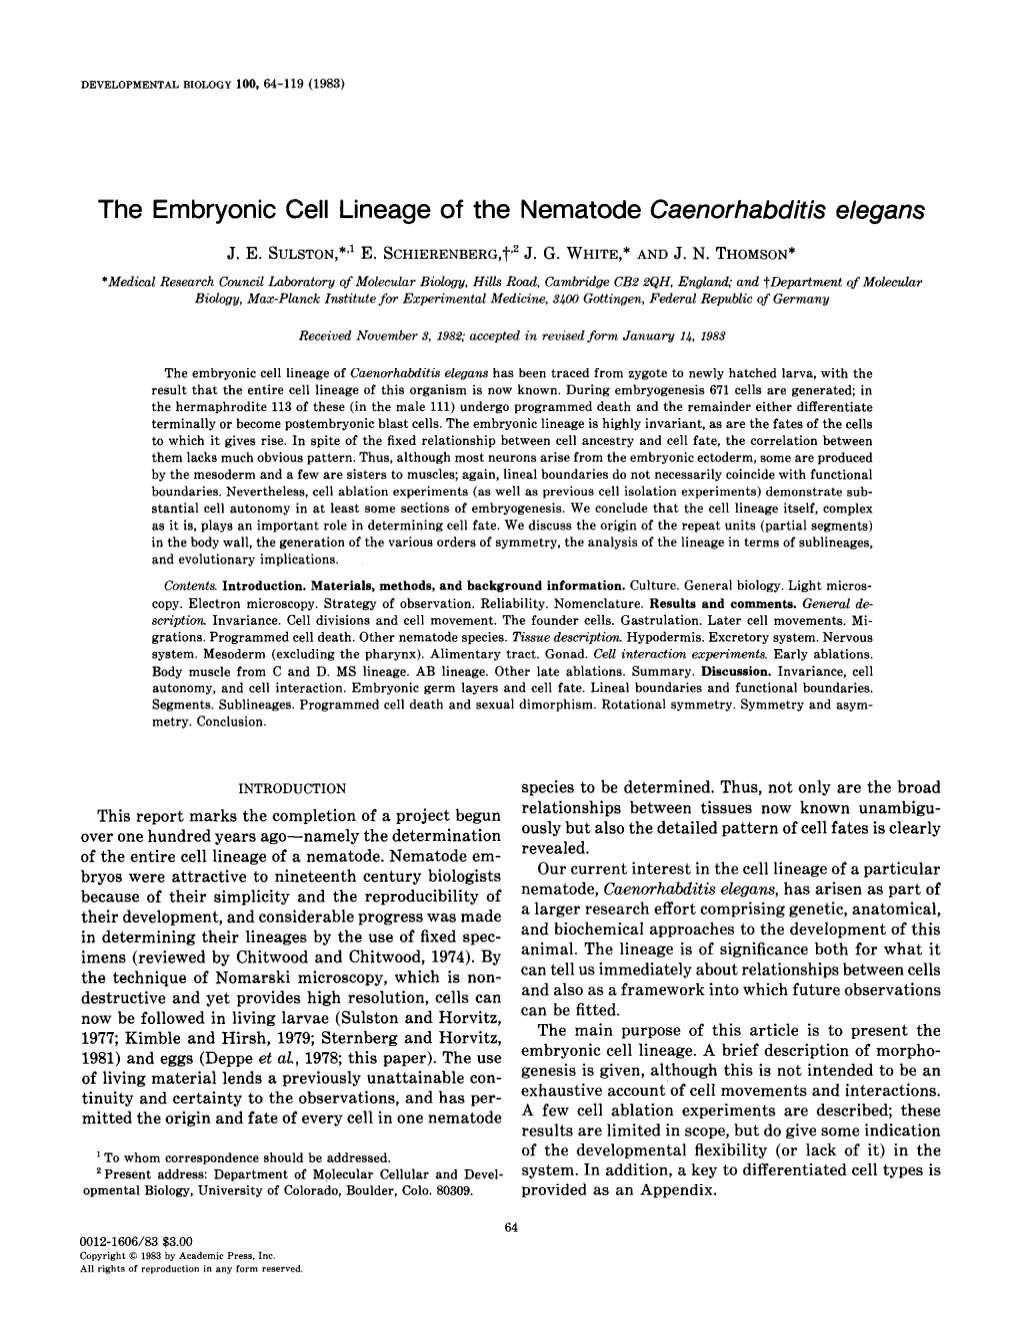 The Embryonic Cell Lineage of the Nematode Caenorhabditis Elegans